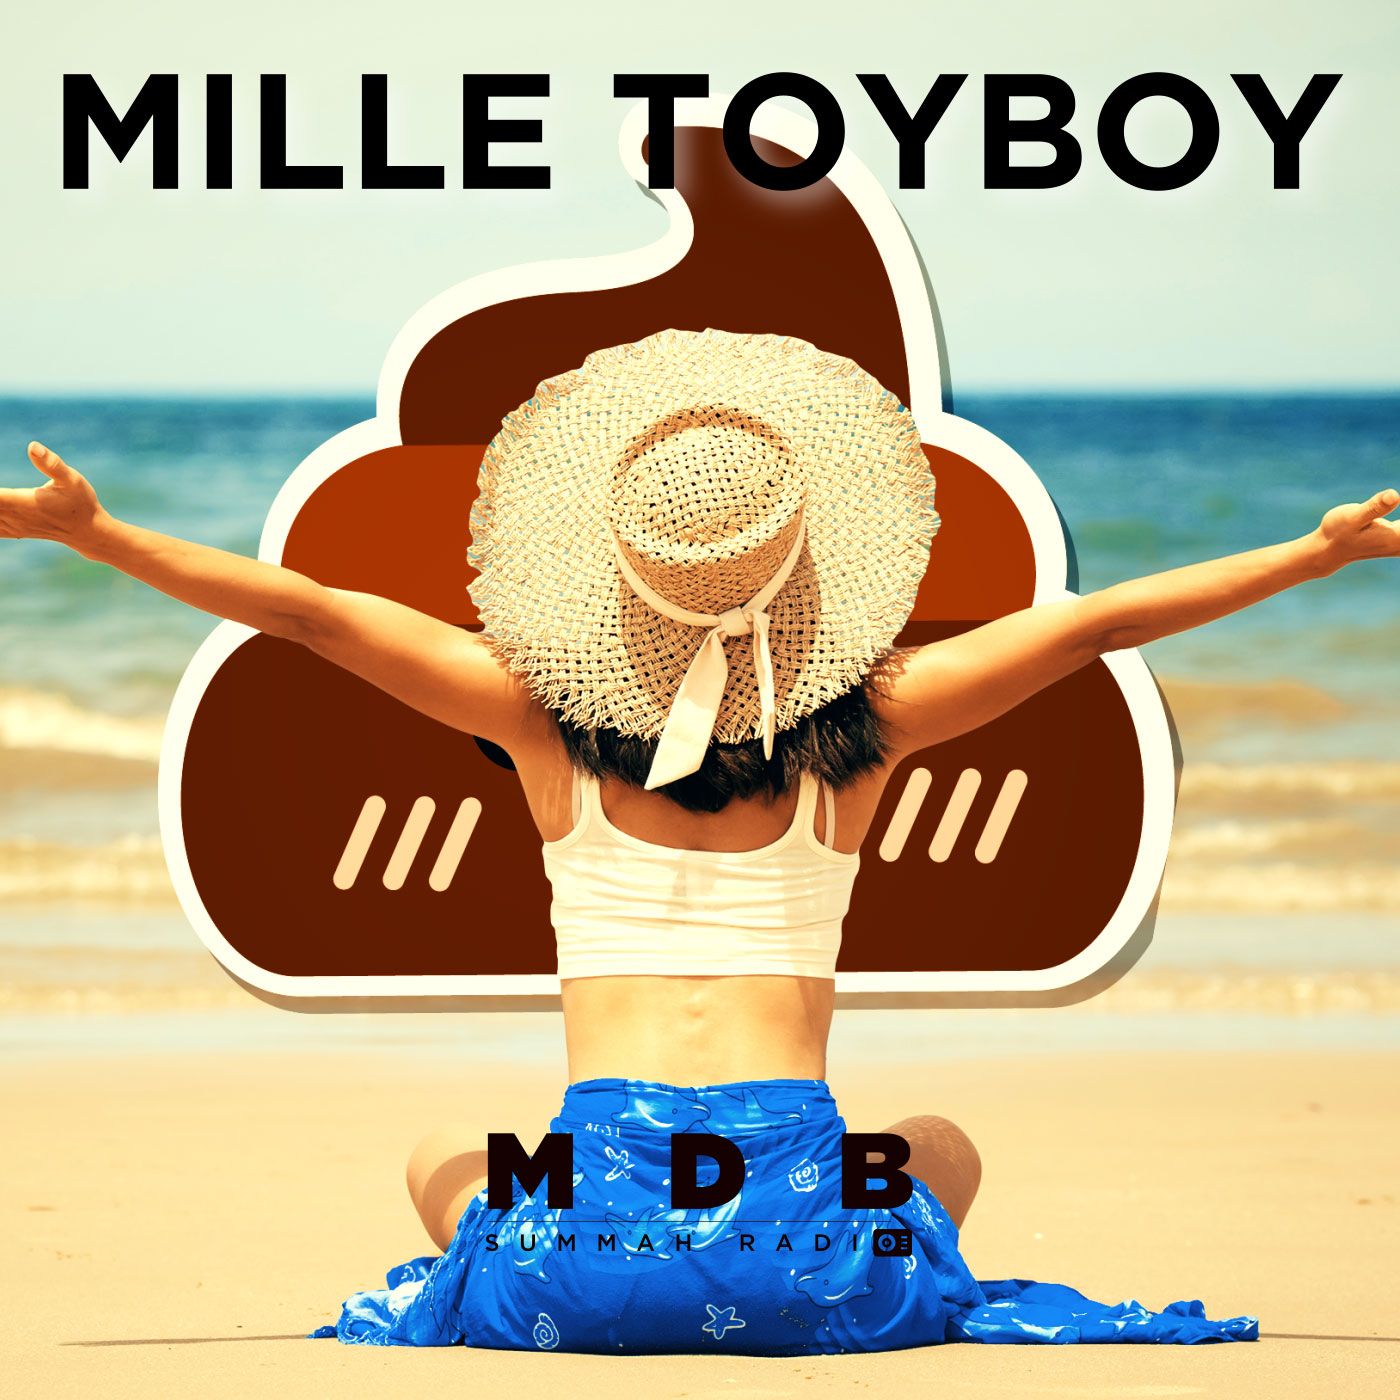 Ep. 84 "Mille Toyboy"